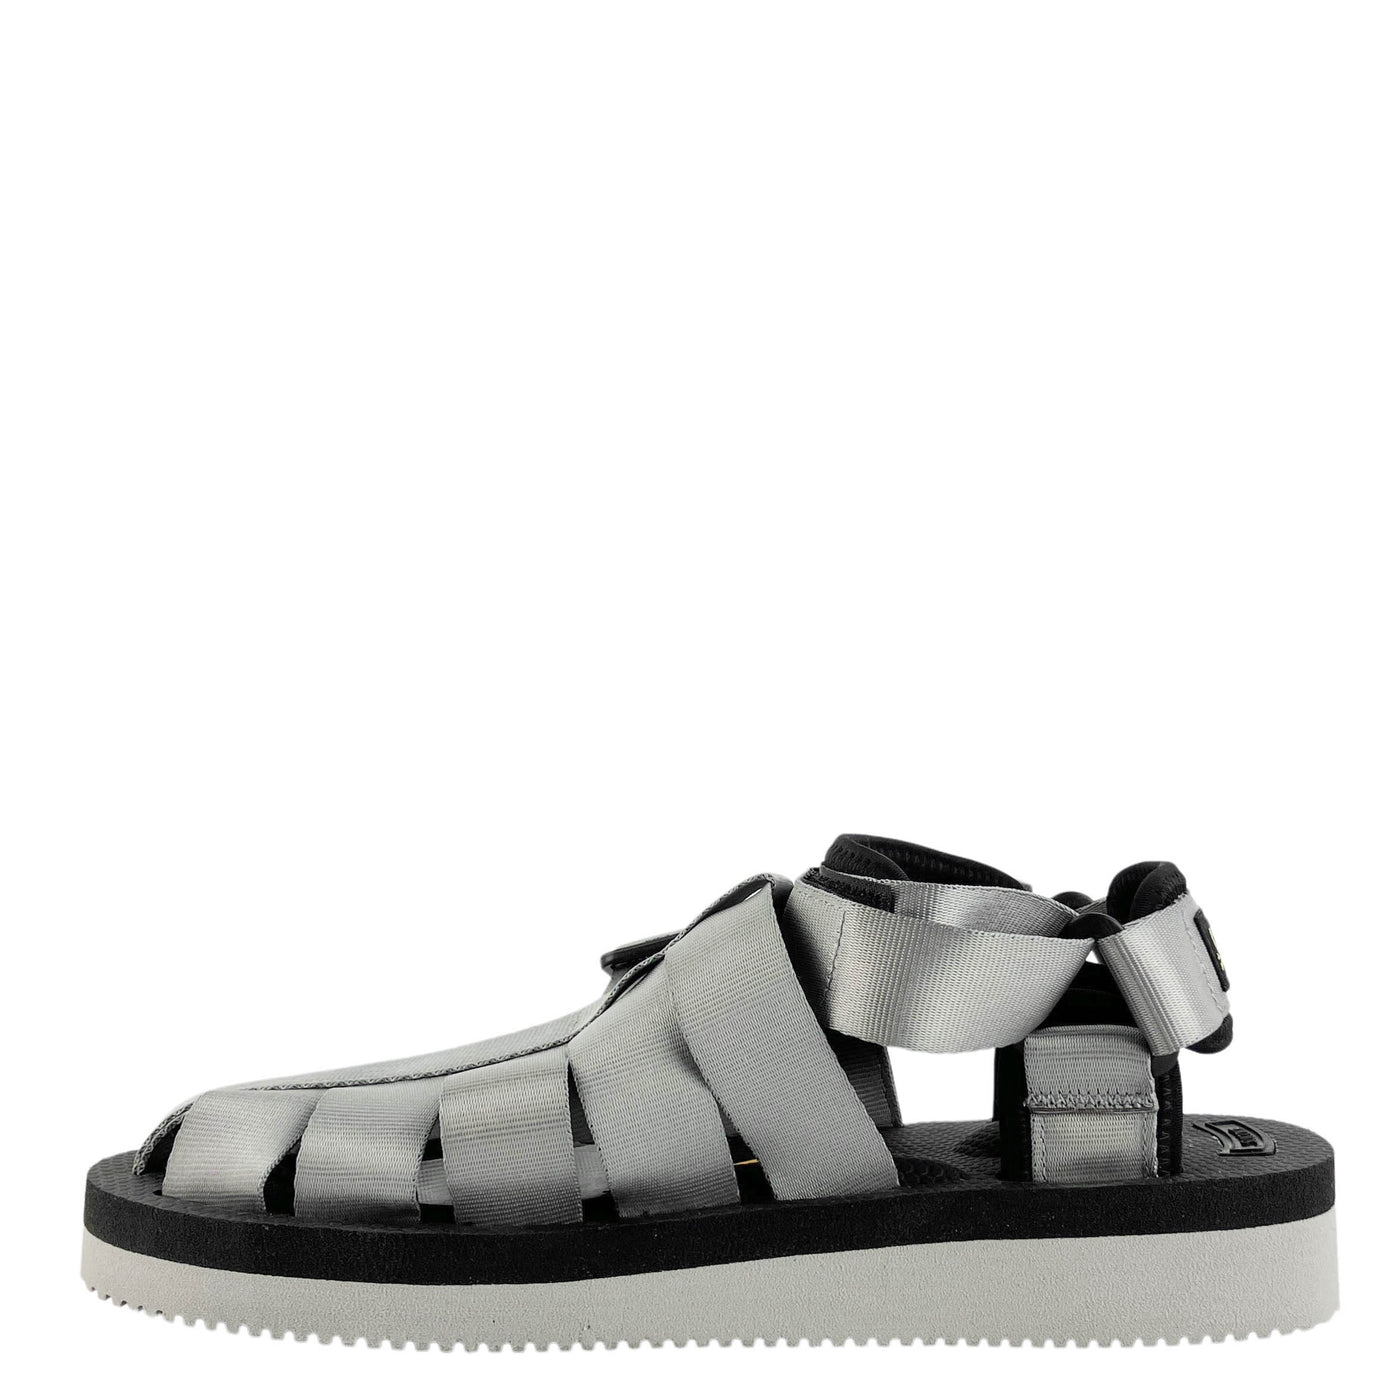 Suicoke x Mastermind Sandals in Grey - Discounts on Suicoke at UAL